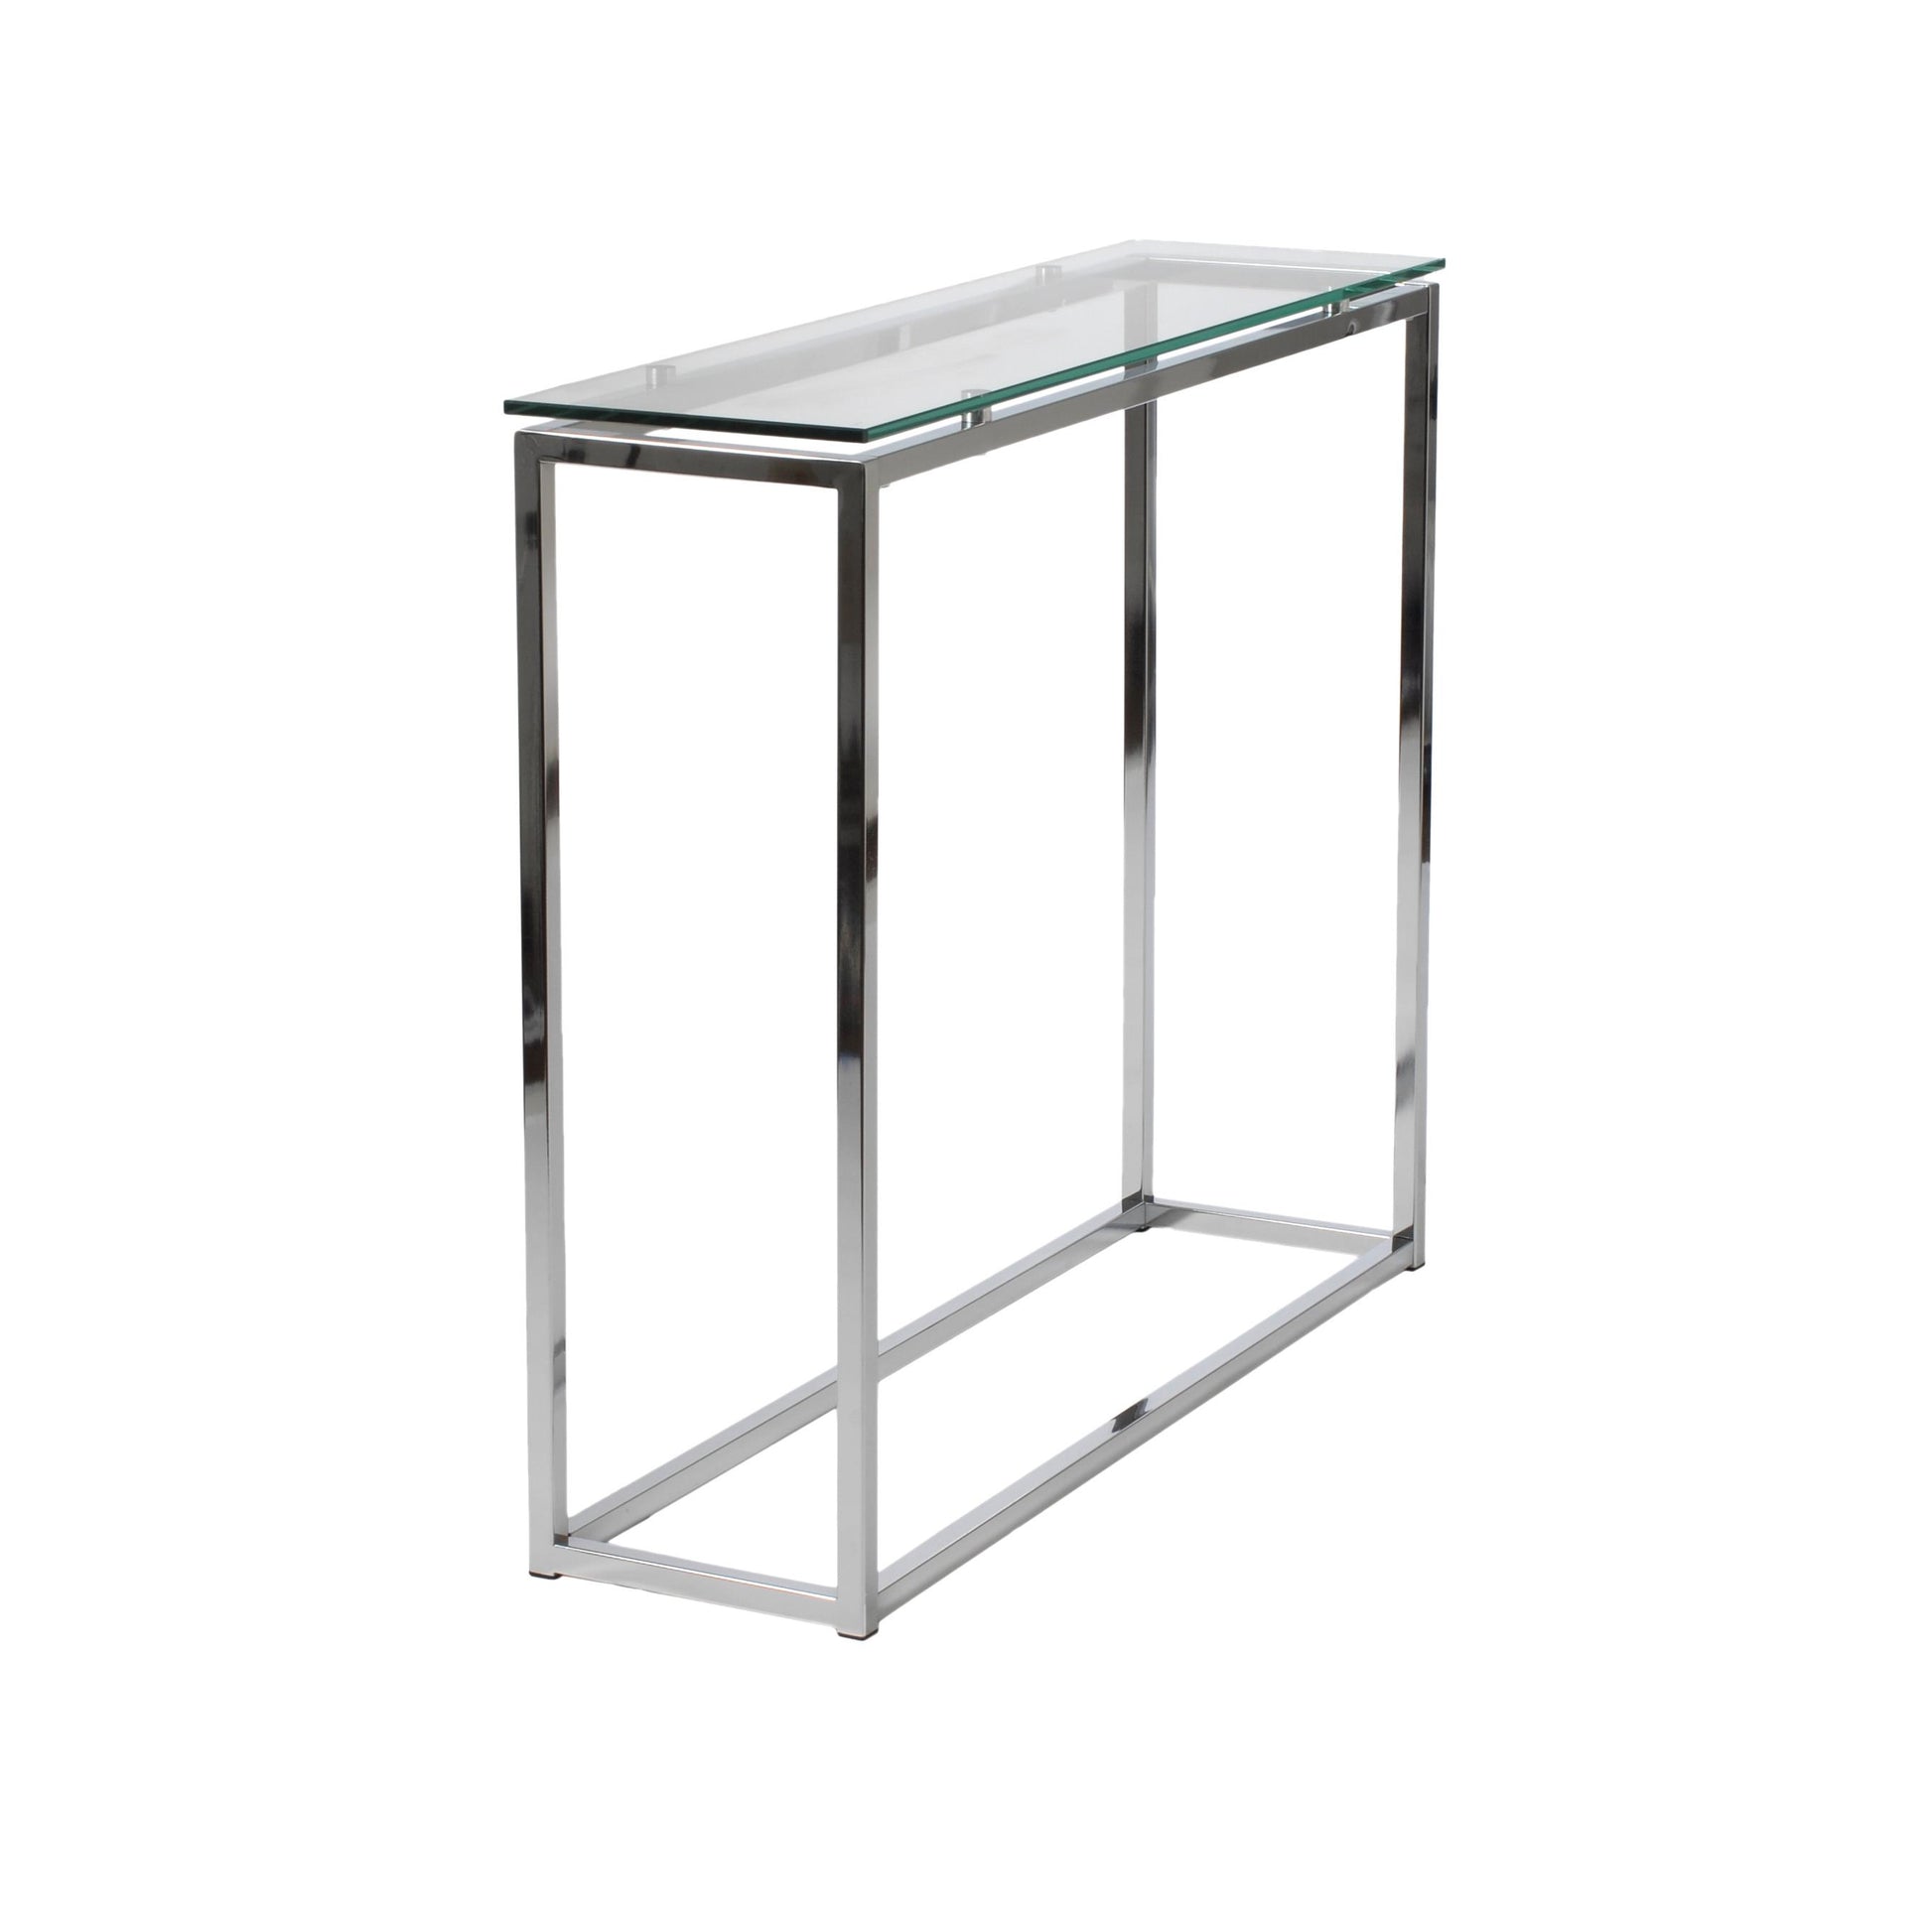 So Hot Right Now: Translucent Glass Furniture